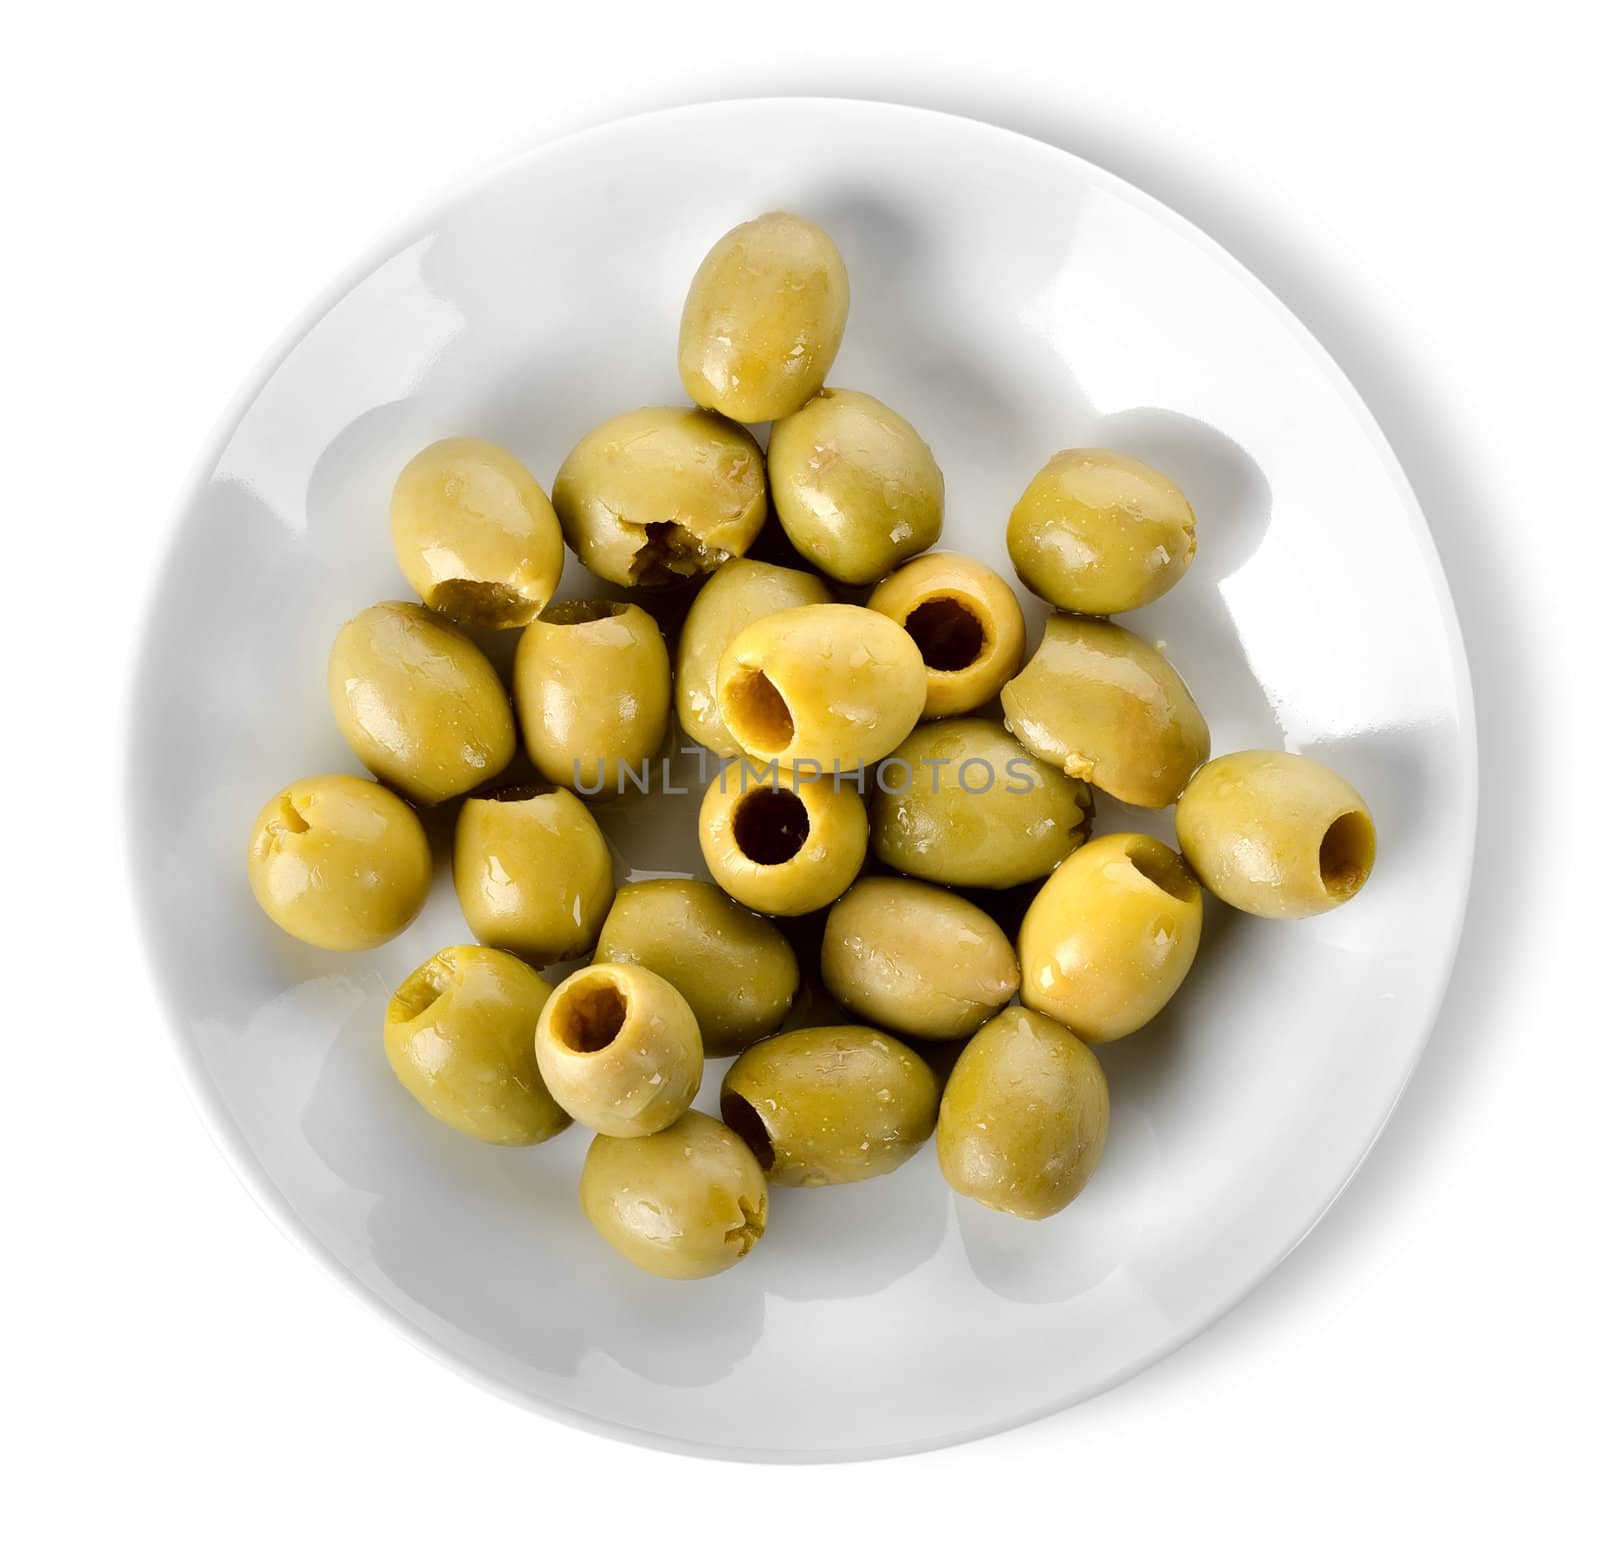 Olives in a plate by Givaga